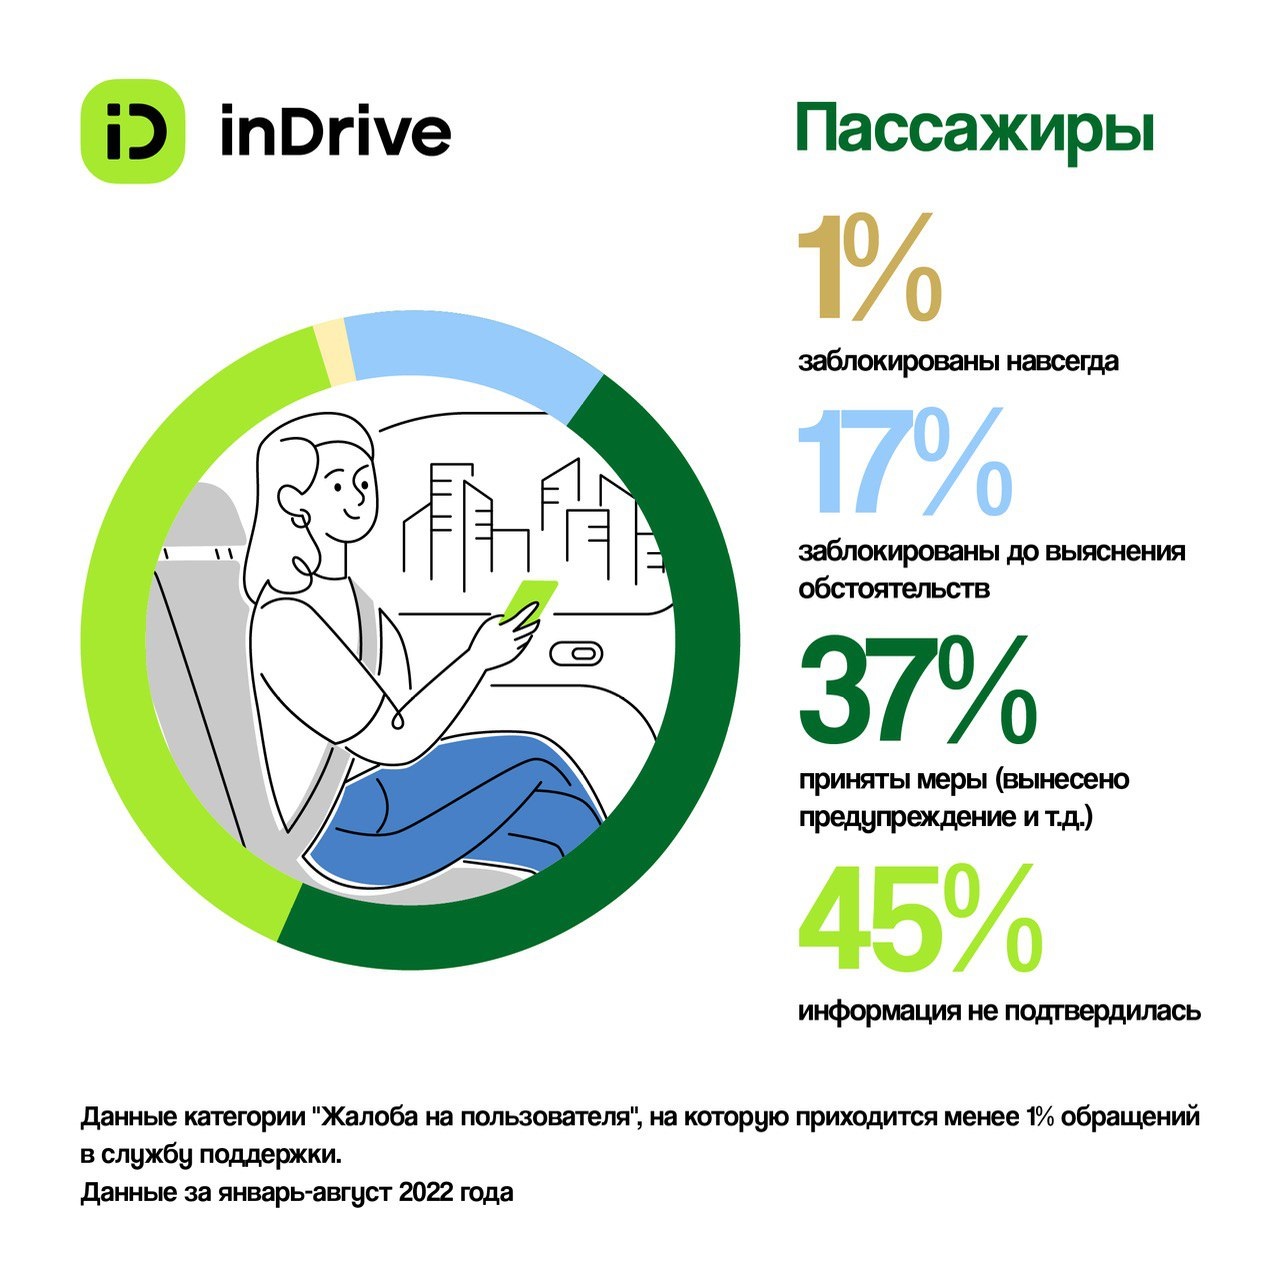 Support indrive com